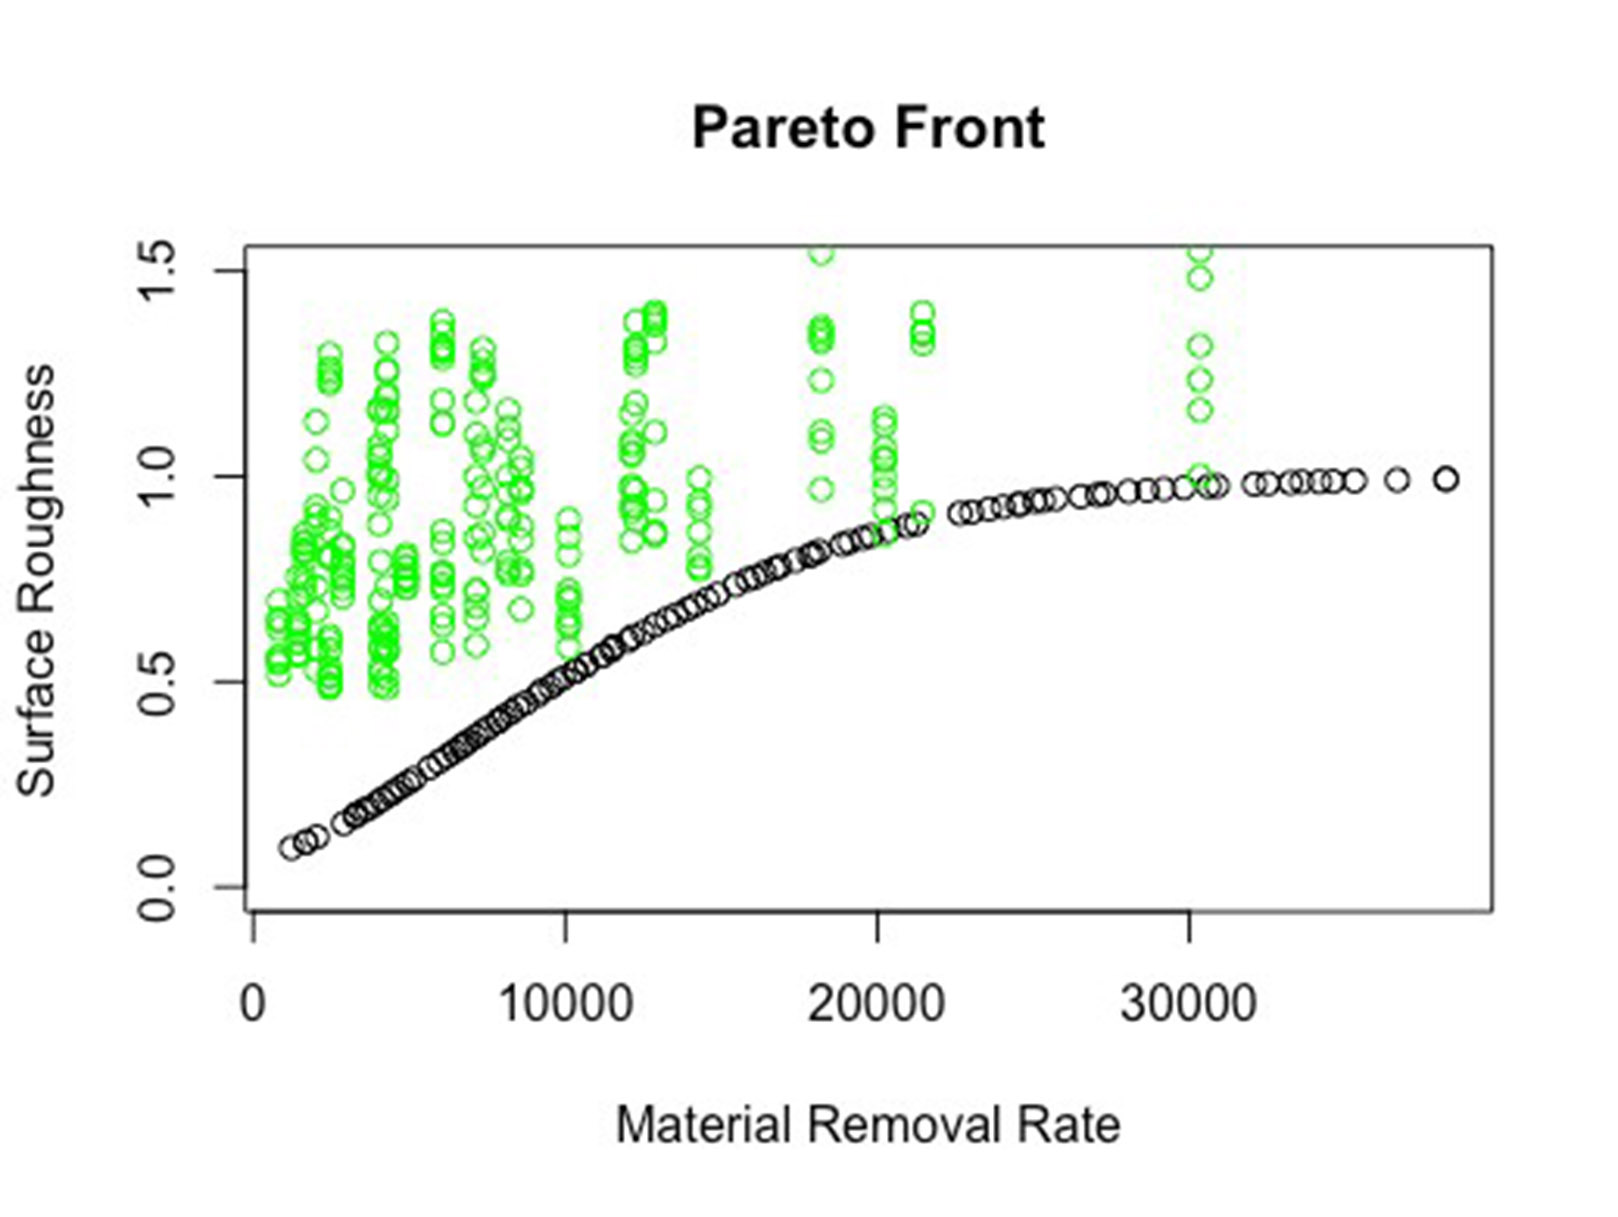 Comparison of Pareto Front to Experimental Results